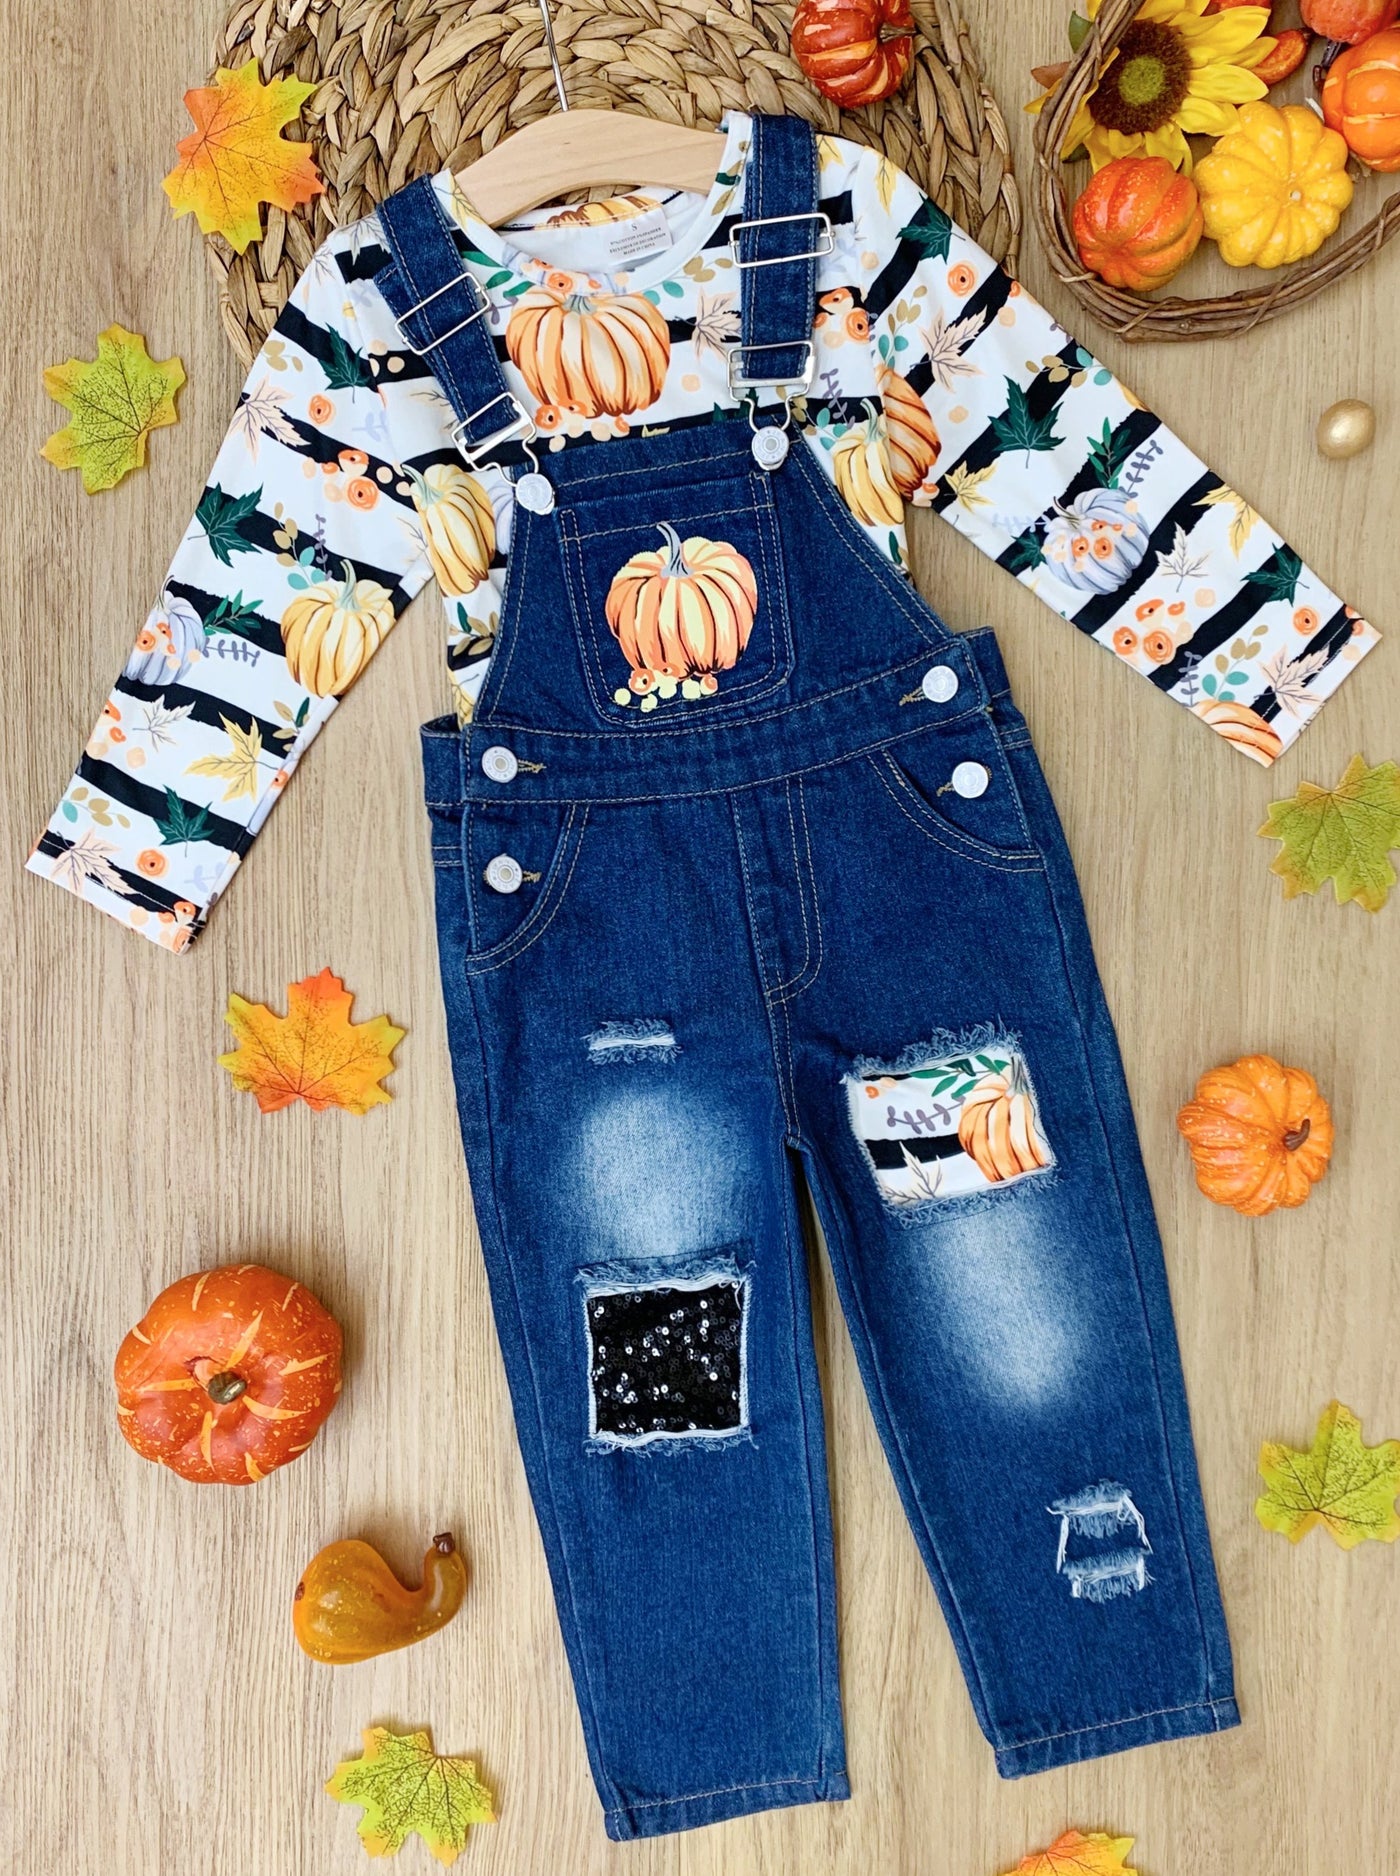 Girls Fall Outfits | Top & Patched Overalls Set - Mia Belle Girls